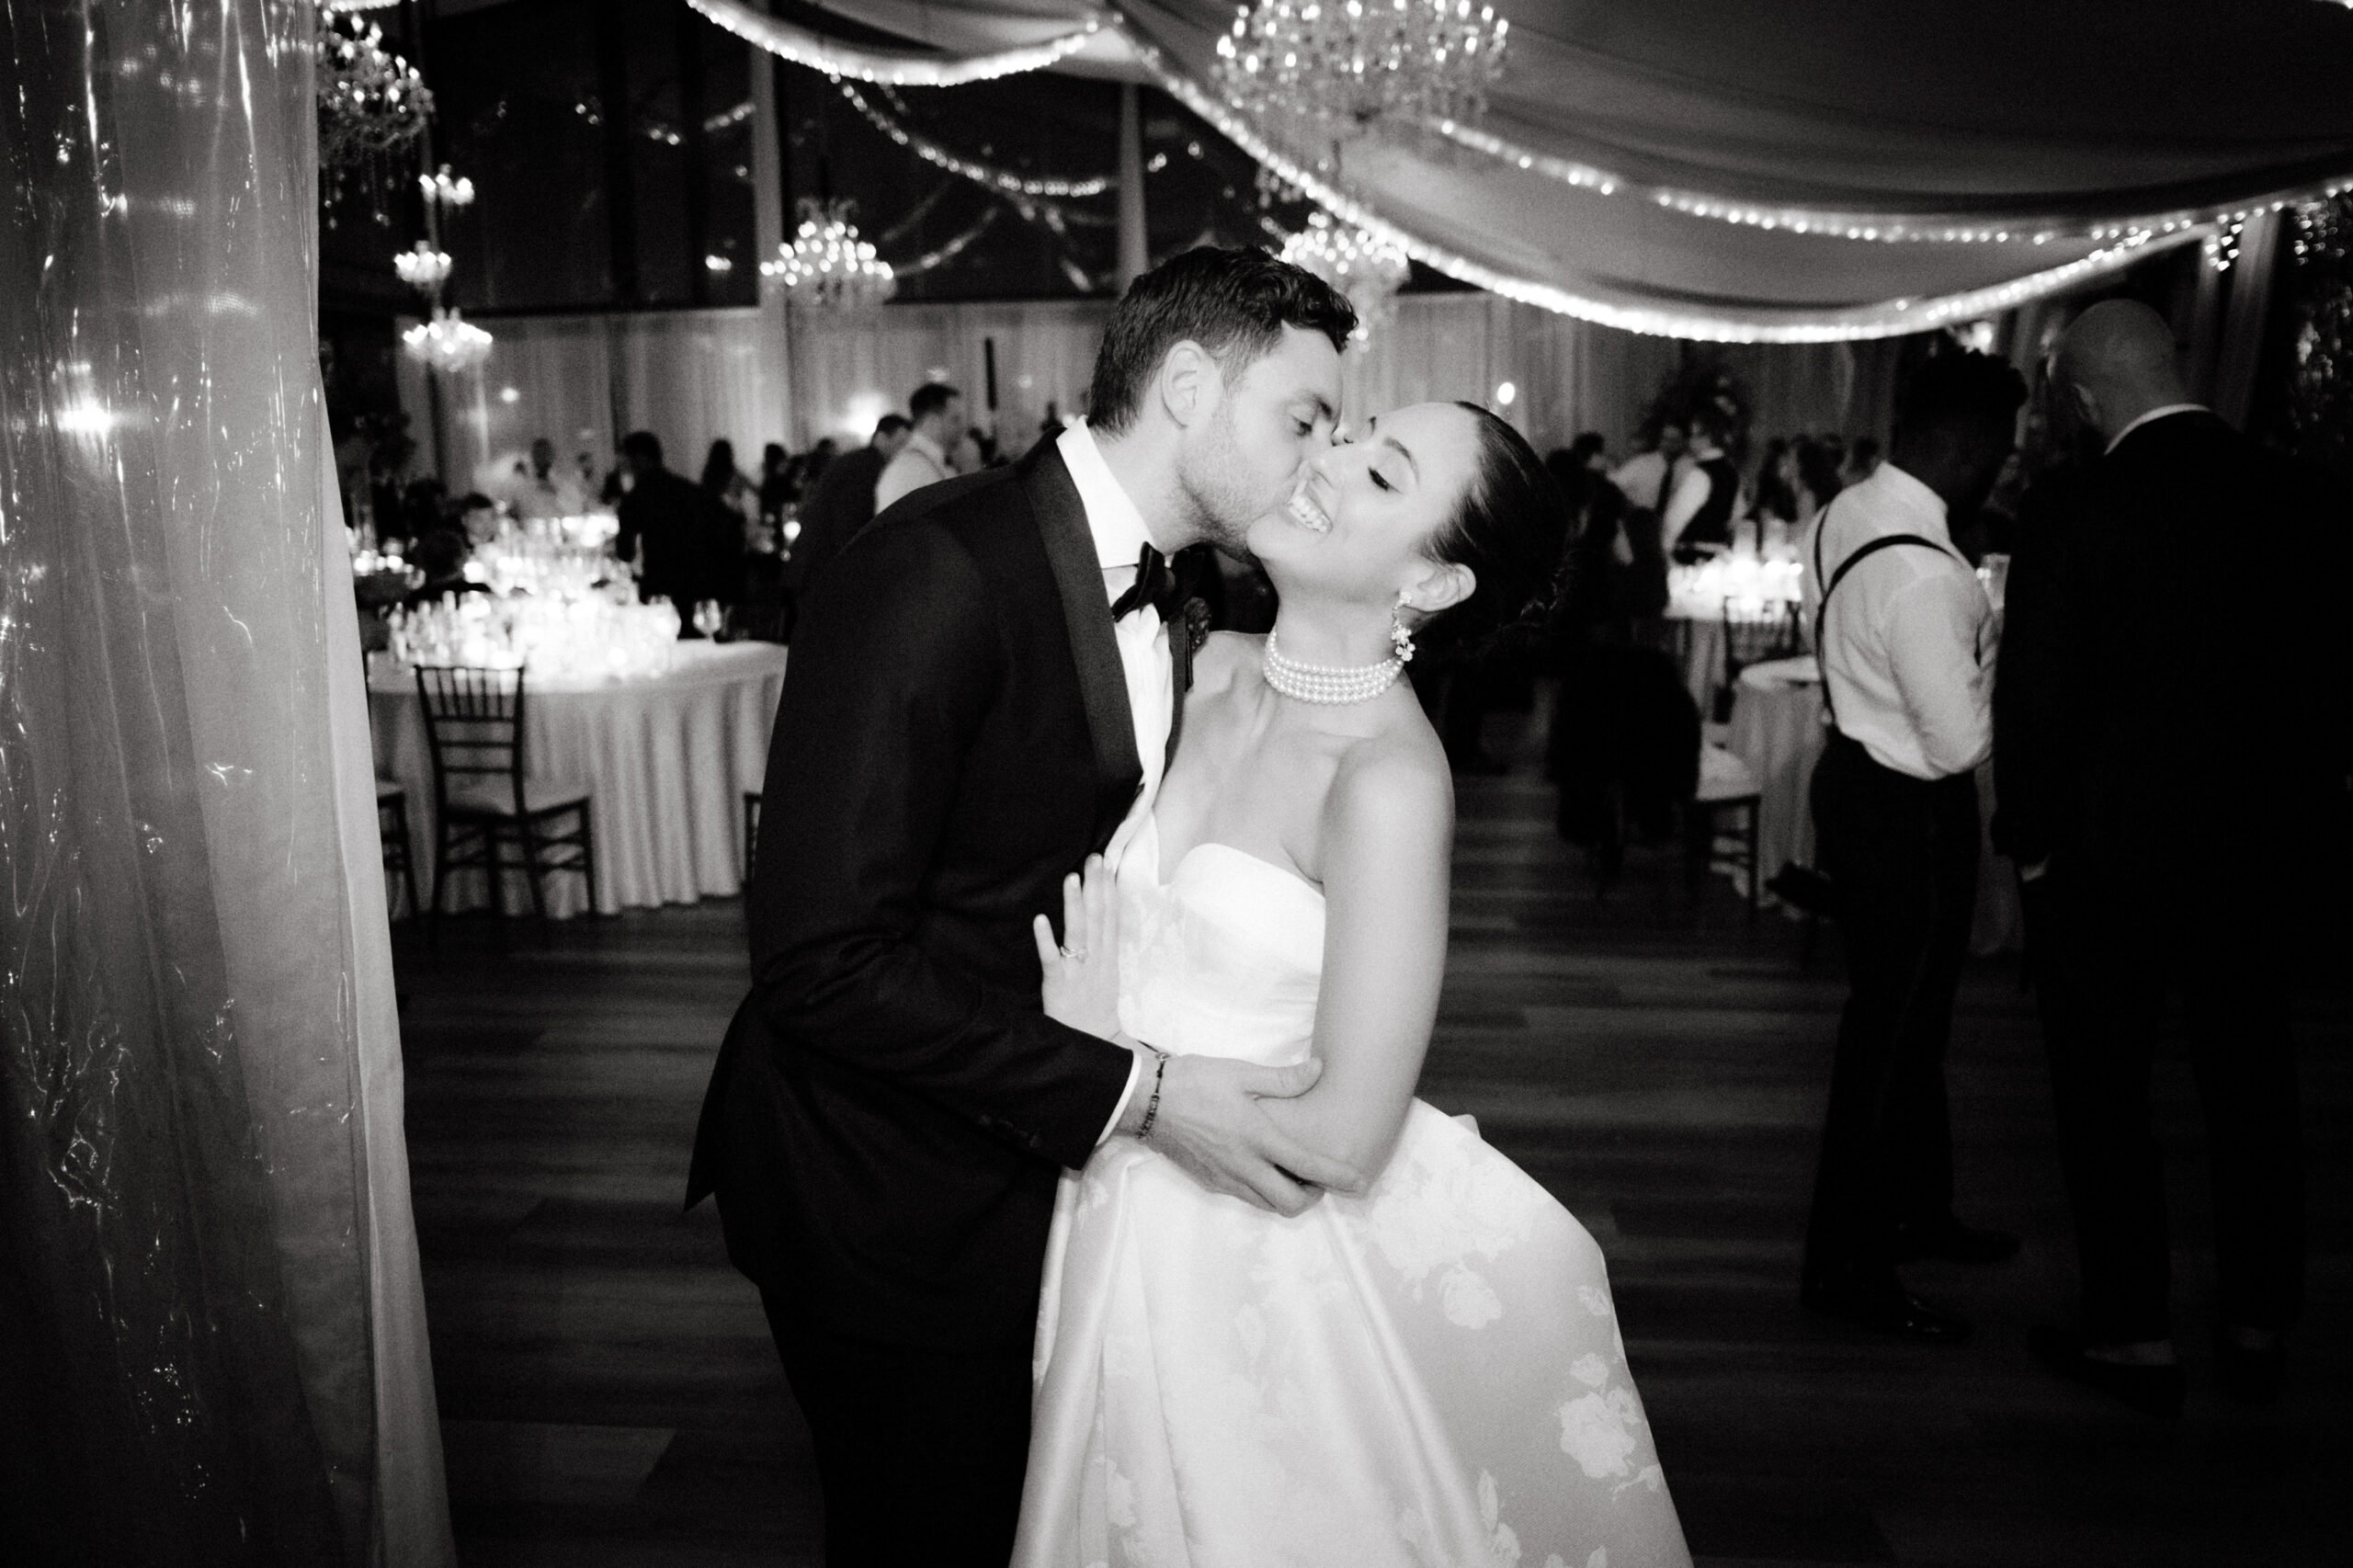 Candid black and white image of the groom kissing the bride on the dance floor. Image by Jenny Fu Studio